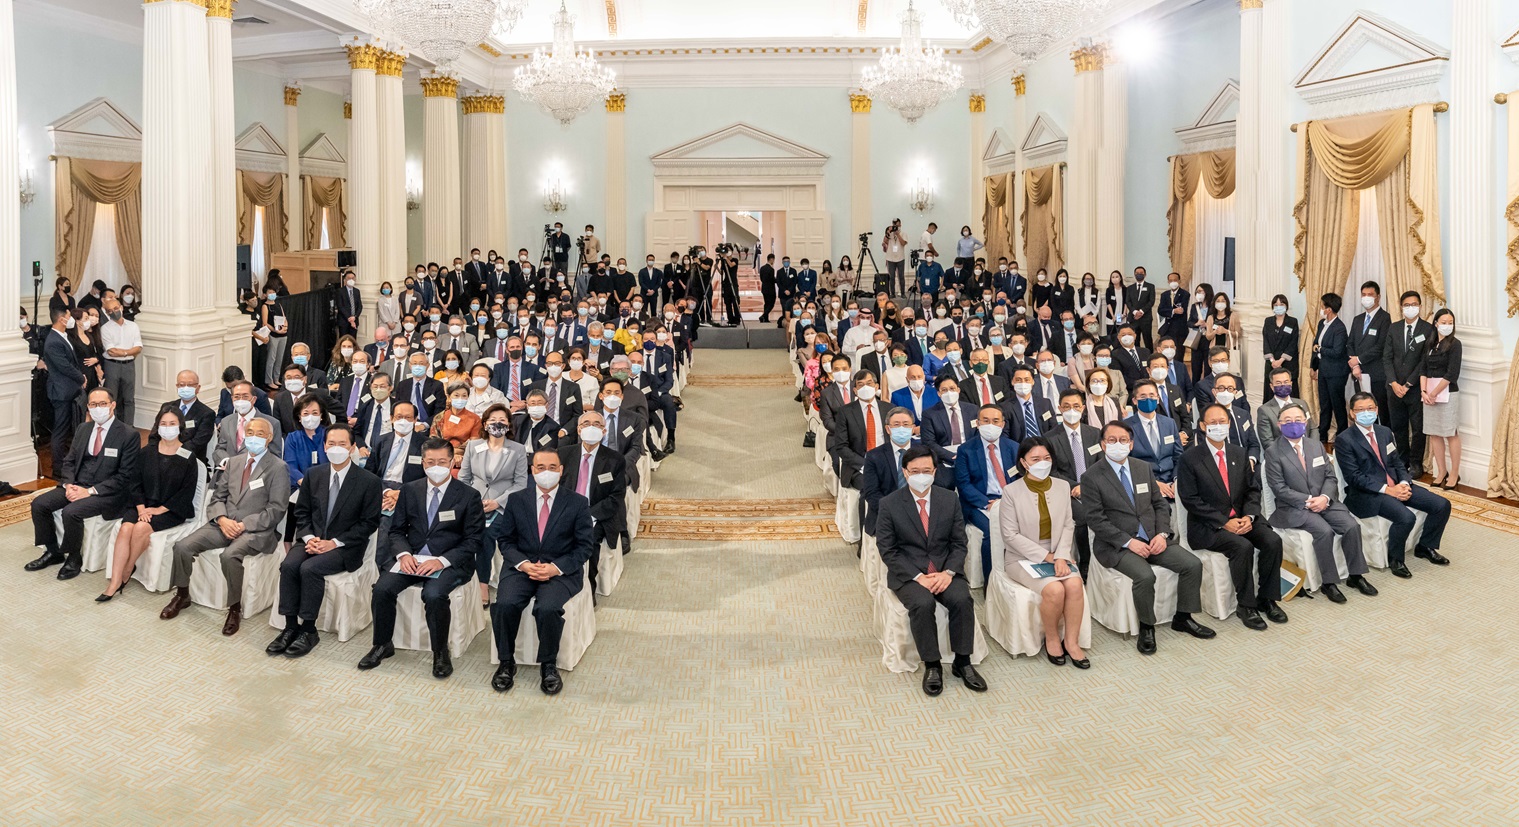 HKSARG principal officials, Central Government officials based in the HKSAR, more than 40 consuls general/deputy consuls general, over 10 representatives of international chambers of commerce and global institutions, as well as local community leaders and scholars, witness the historic launch of the first volume of the English edition of Hong Kong Chronicles.